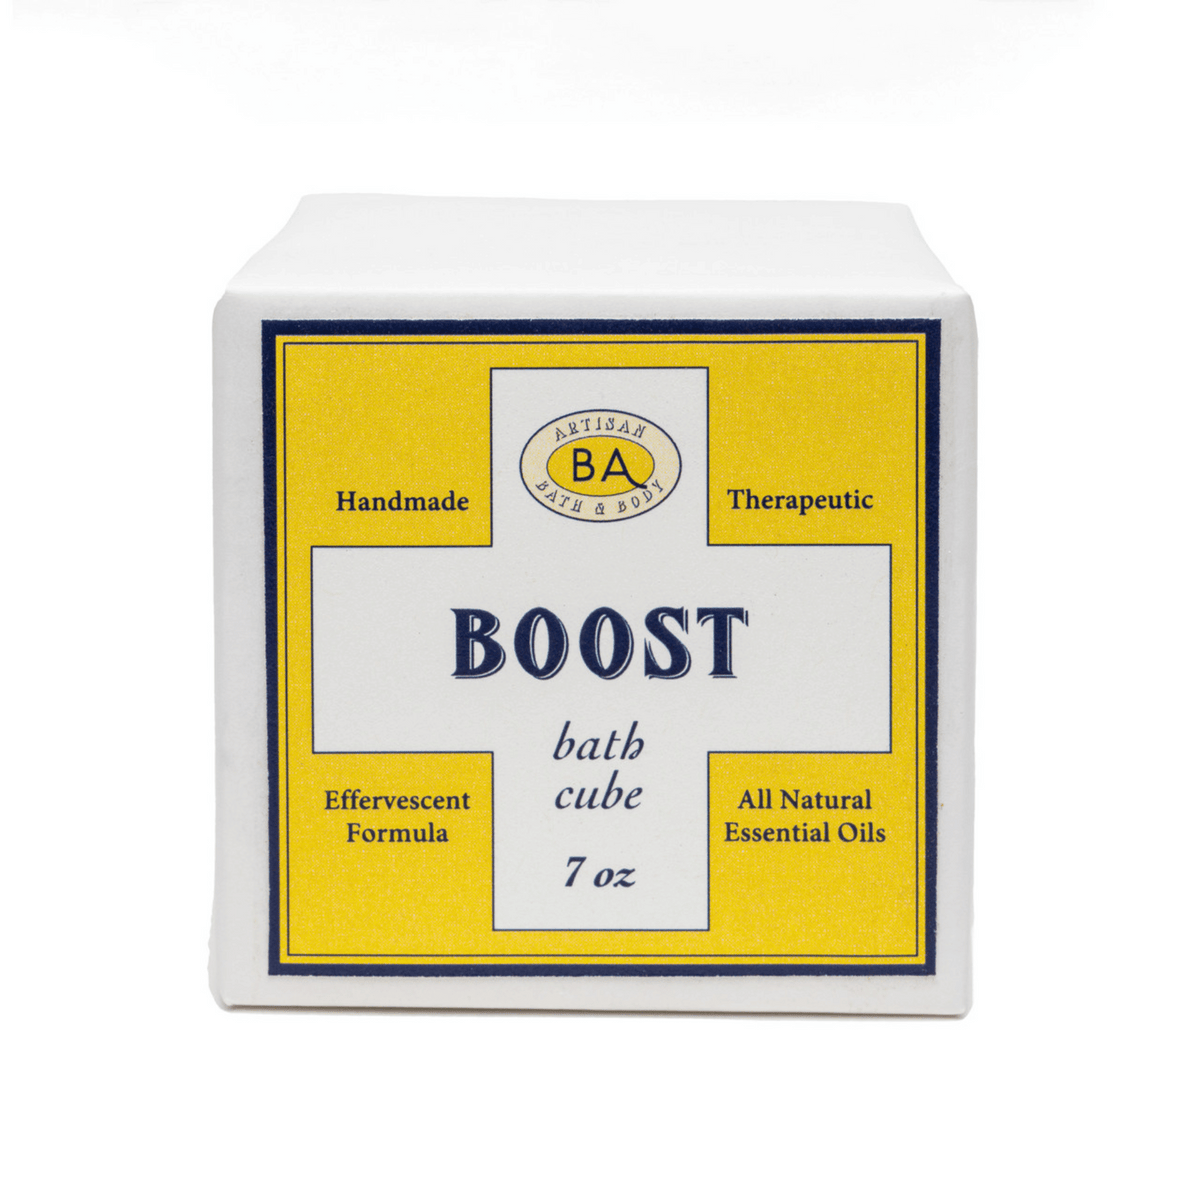 Primary Image of Boost Bath Cube